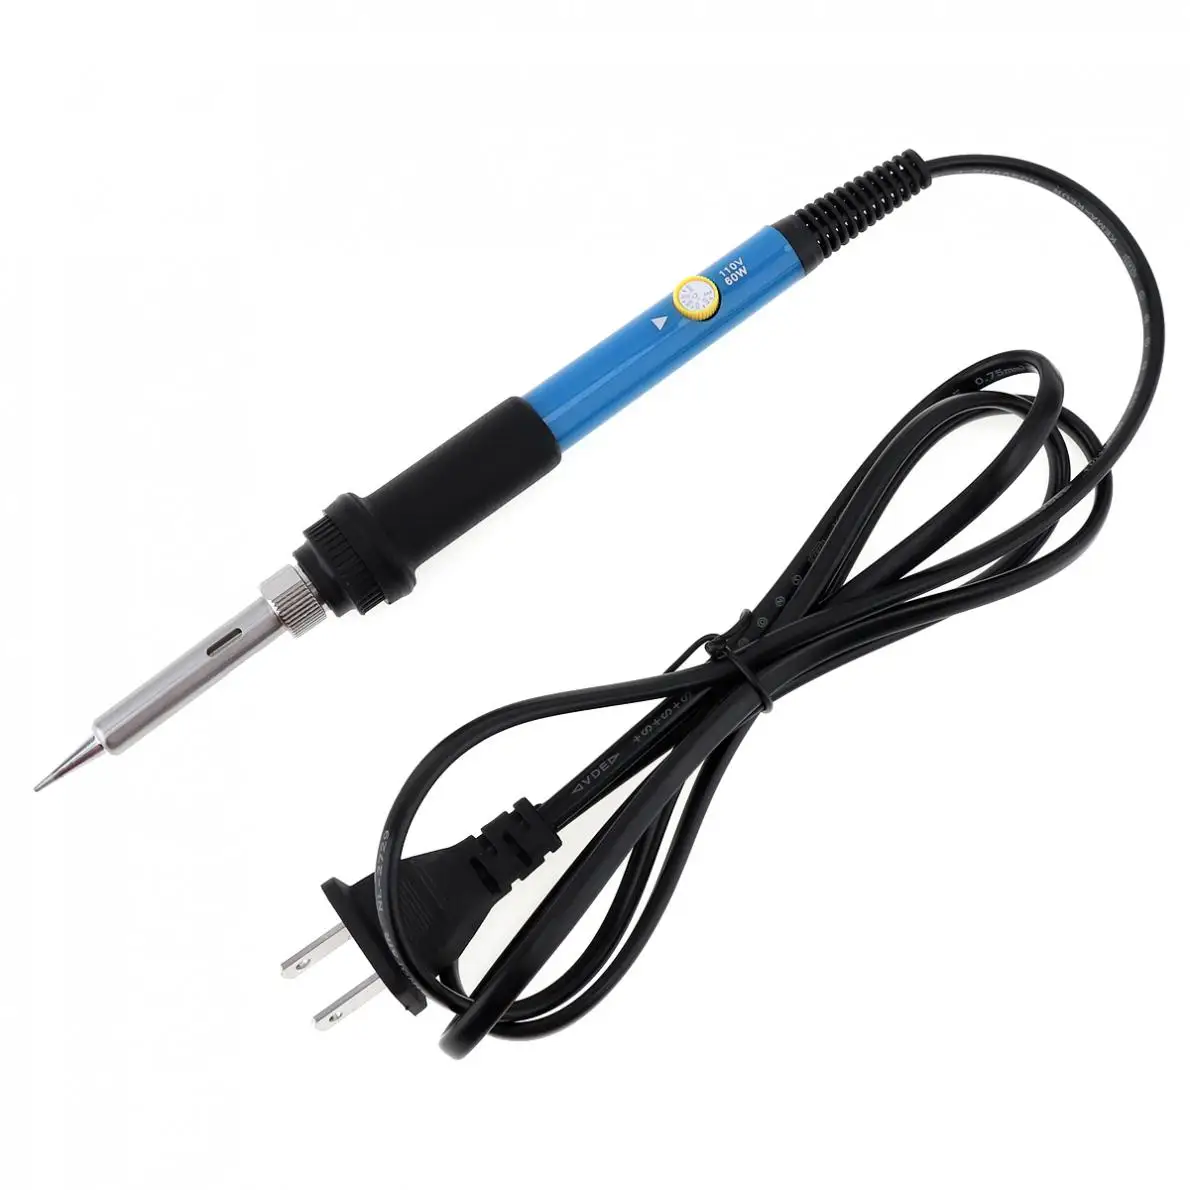 1pc 220V / 110V 60W 200-450 Celcius Adjustable Temperature Internal Heating Electric Soldering Iron wit w808 1 1 screen 60w internal heating electronic soldering iron black silver 110v